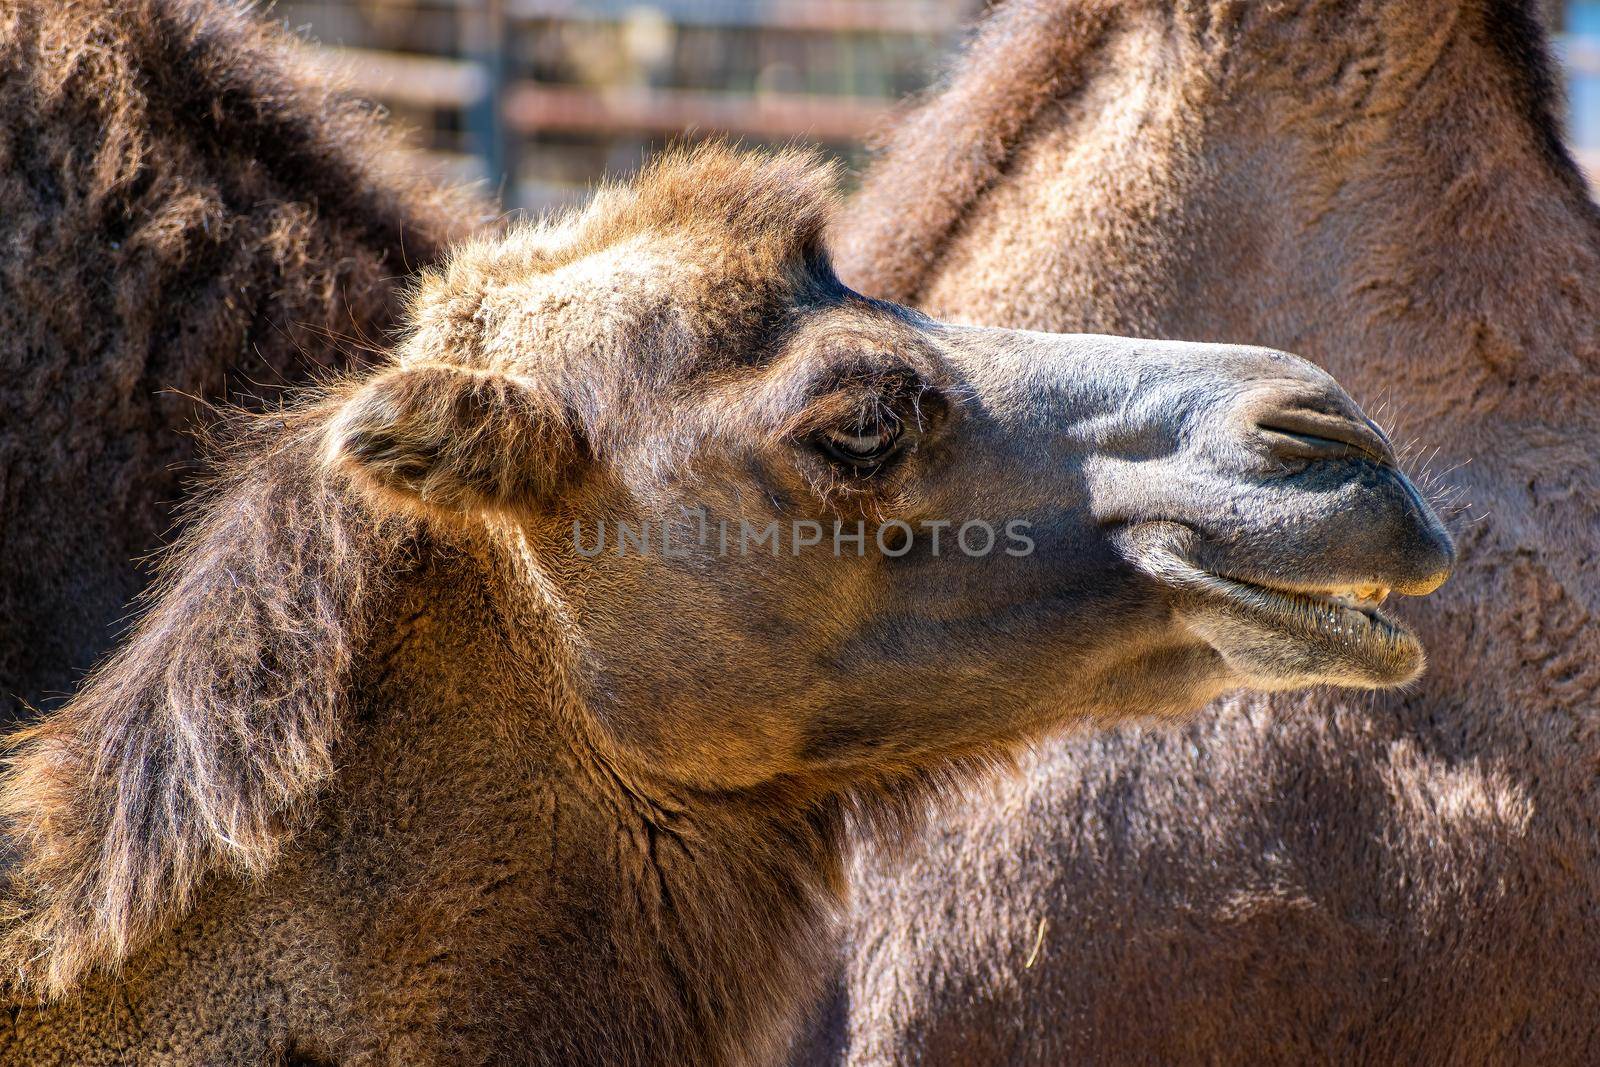 Camel head close-up shot side view by rostik924